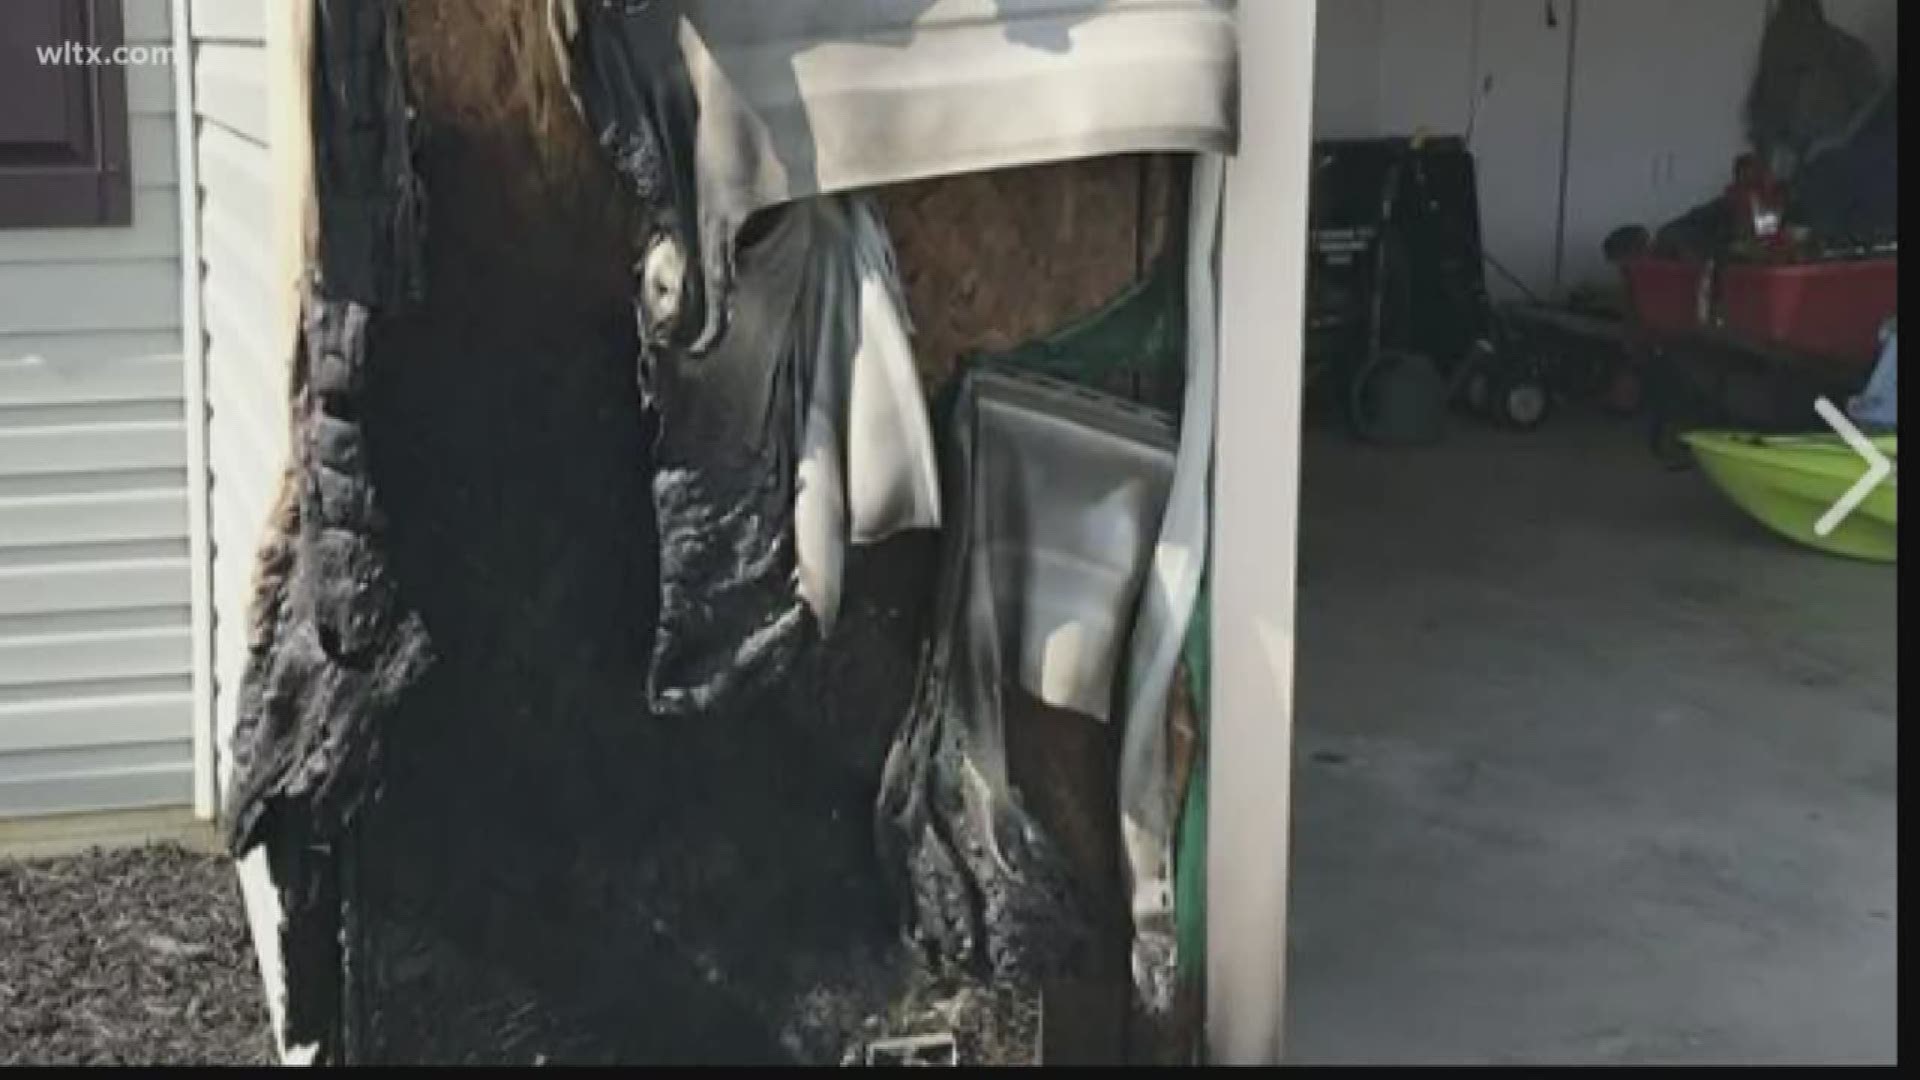 A post seen on Facebook has really started to concern folks on what mulch is capable of. In the post, it says that spontaneous combustion from black mulch caused this home fire damage.